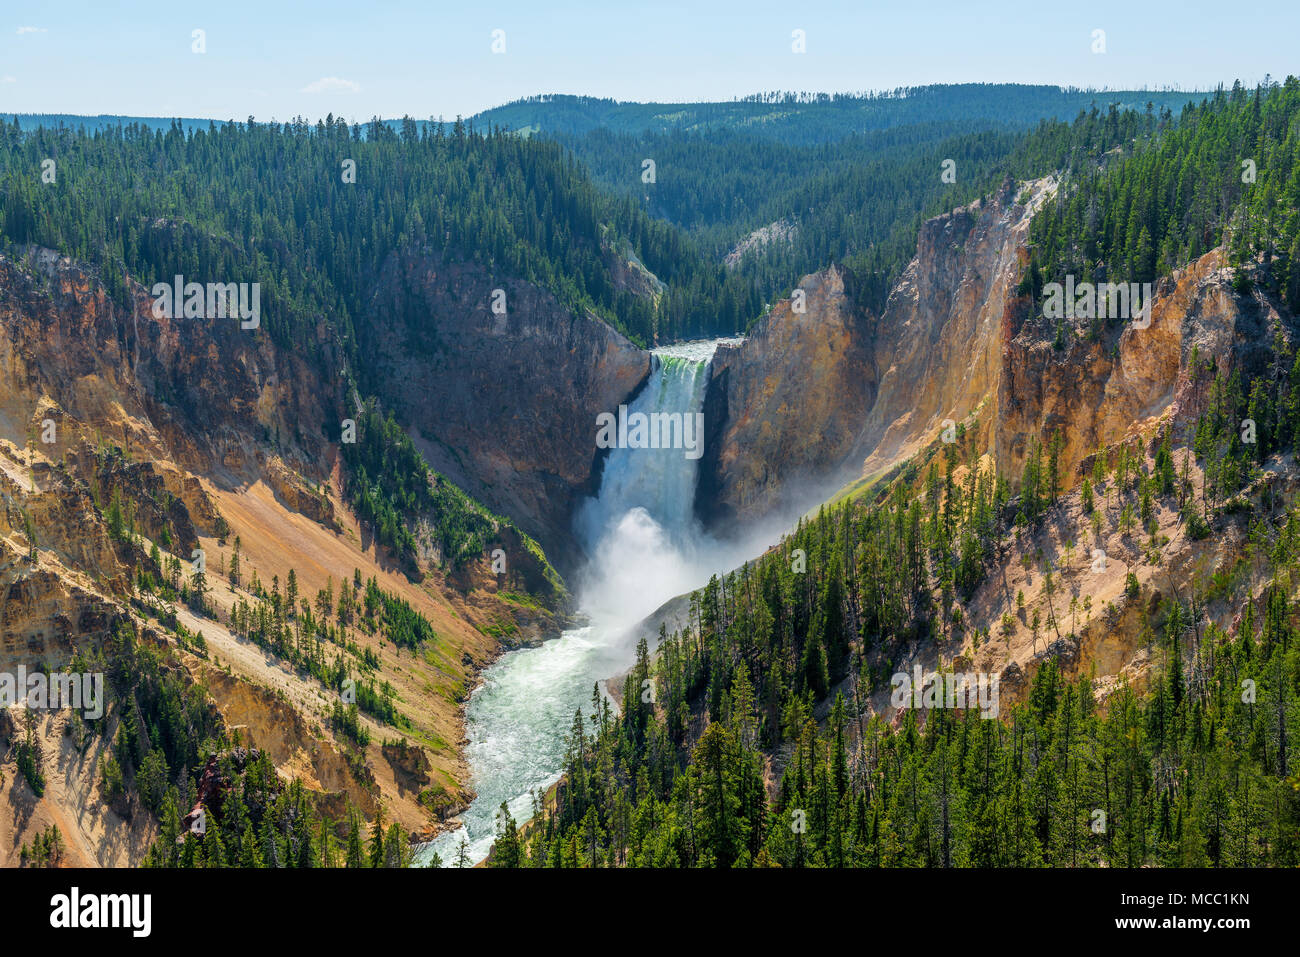 Landscape of the pine forest and Upper Yellowstone Falls inside Yellowstone national park on a sunny day in summer, Wyoming, USA. Stock Photo